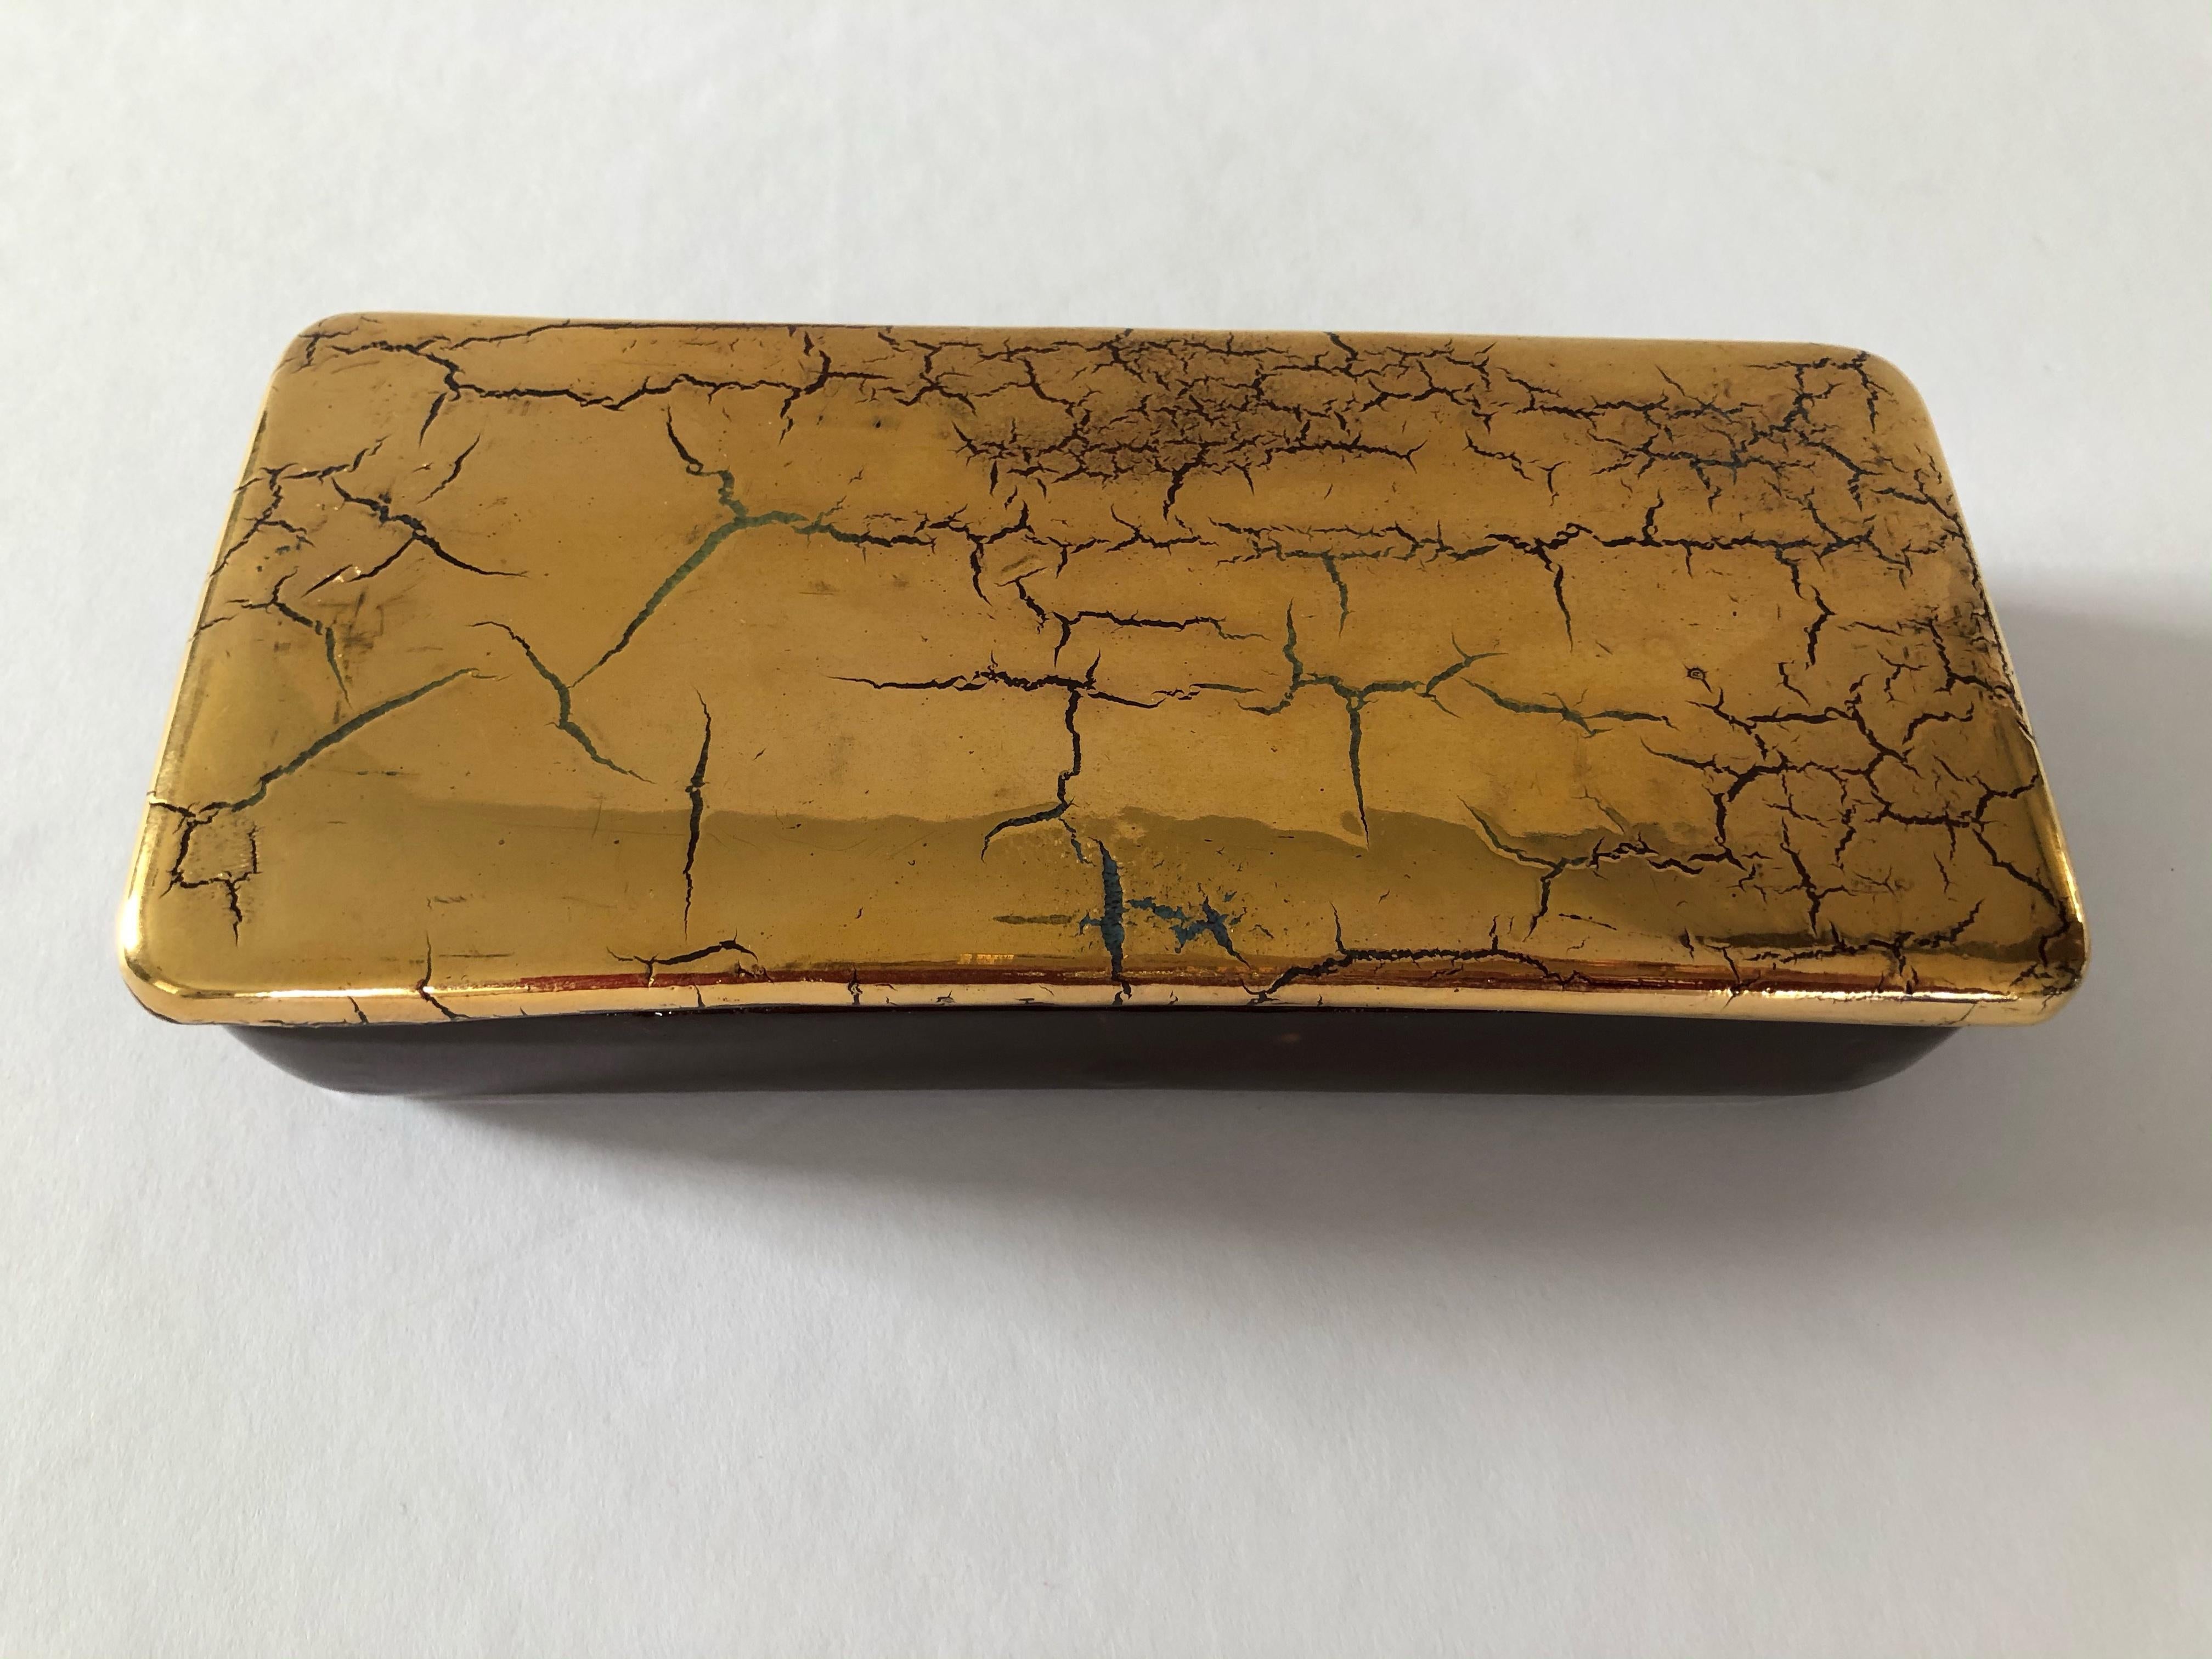 A striking Bitossi box from the 1960s in cracked gold. Made in Italy, the box has a brown glazed bottom and the top has a gold crackled glaze with wonderful patina. The gold glaze is a rare find.